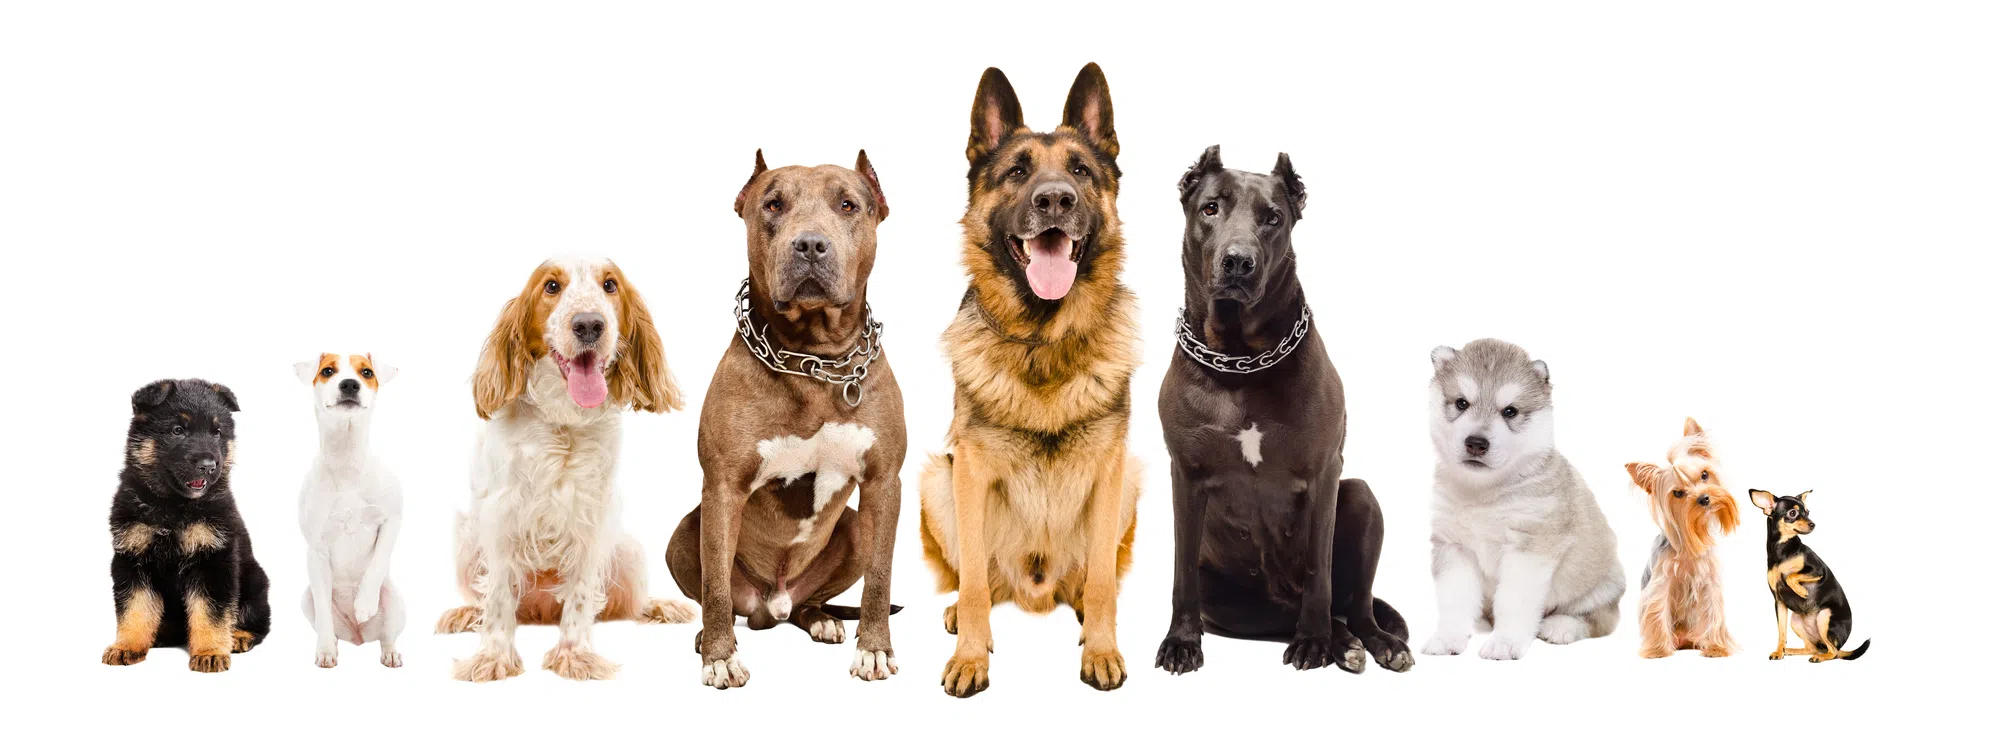 Personality Profile - What Your Dog's Breed Says About Your Personality